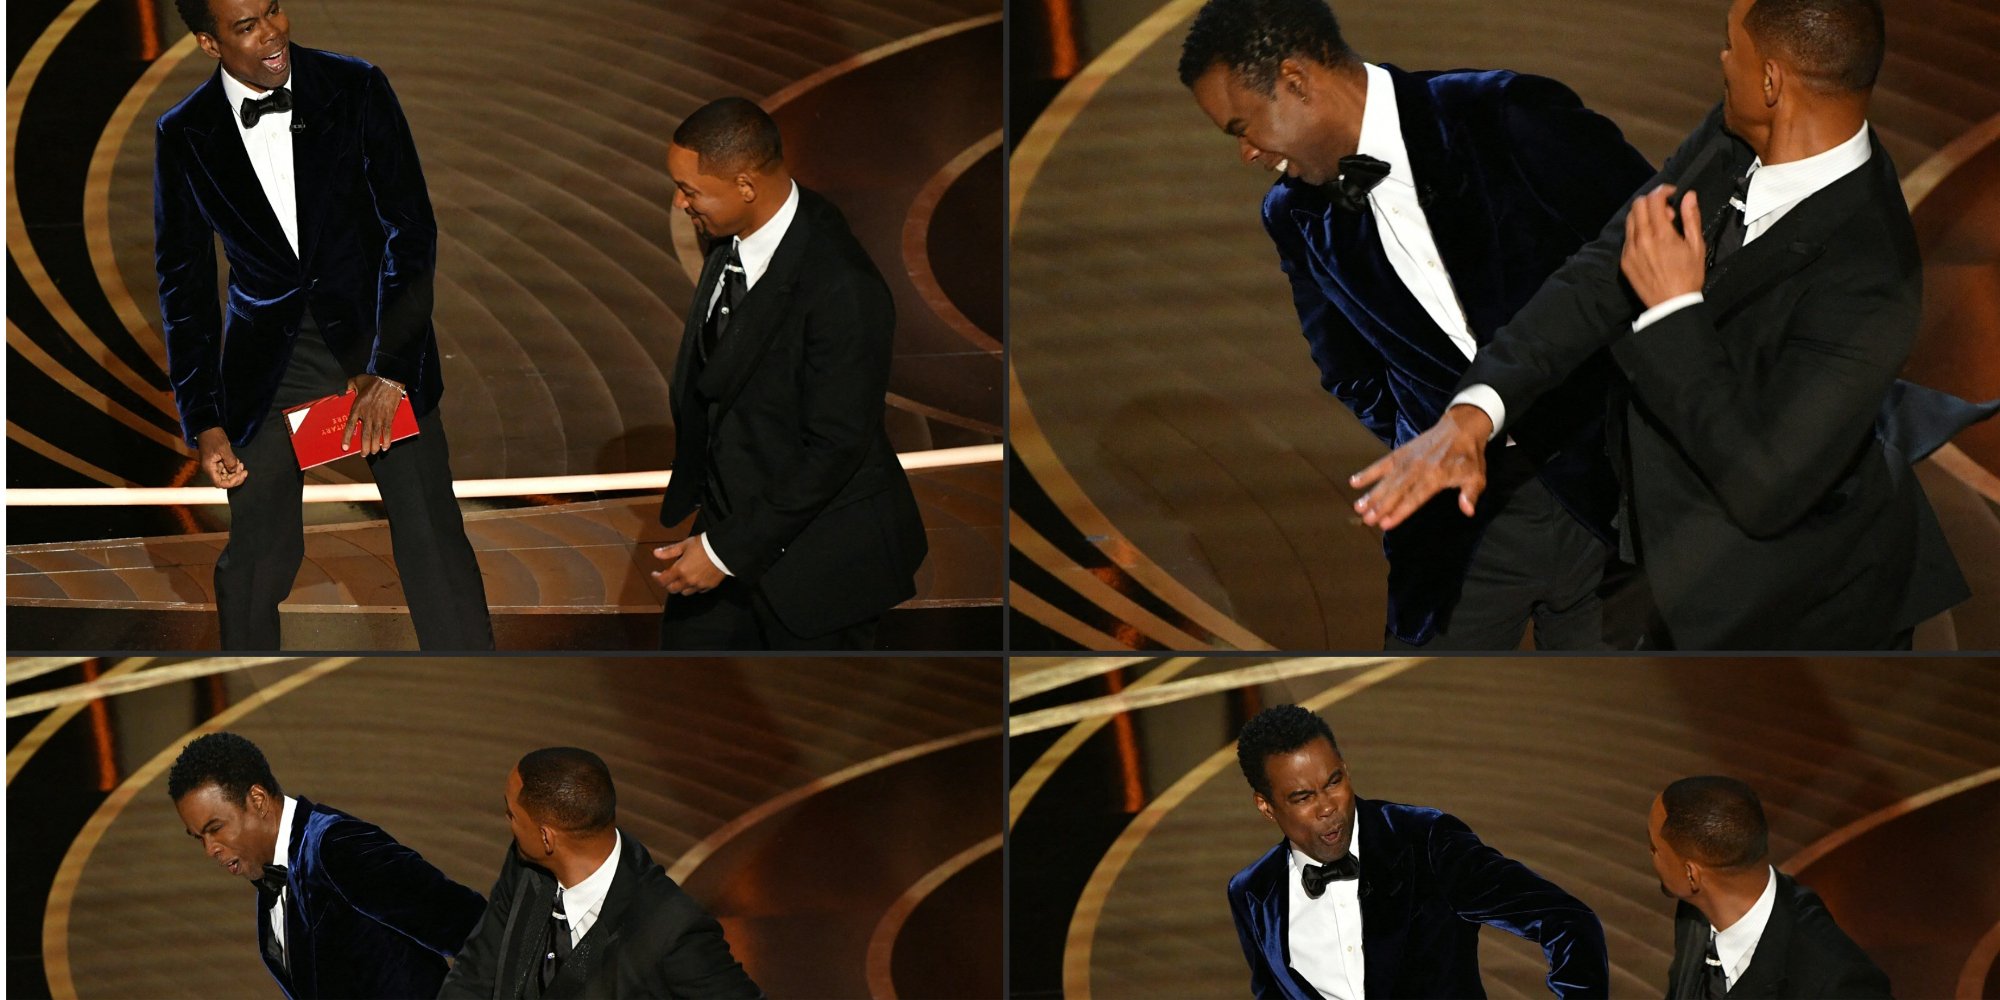 A montage of photos depicting when Will Smith slapped Chris Rock at the 2022 Oscars.